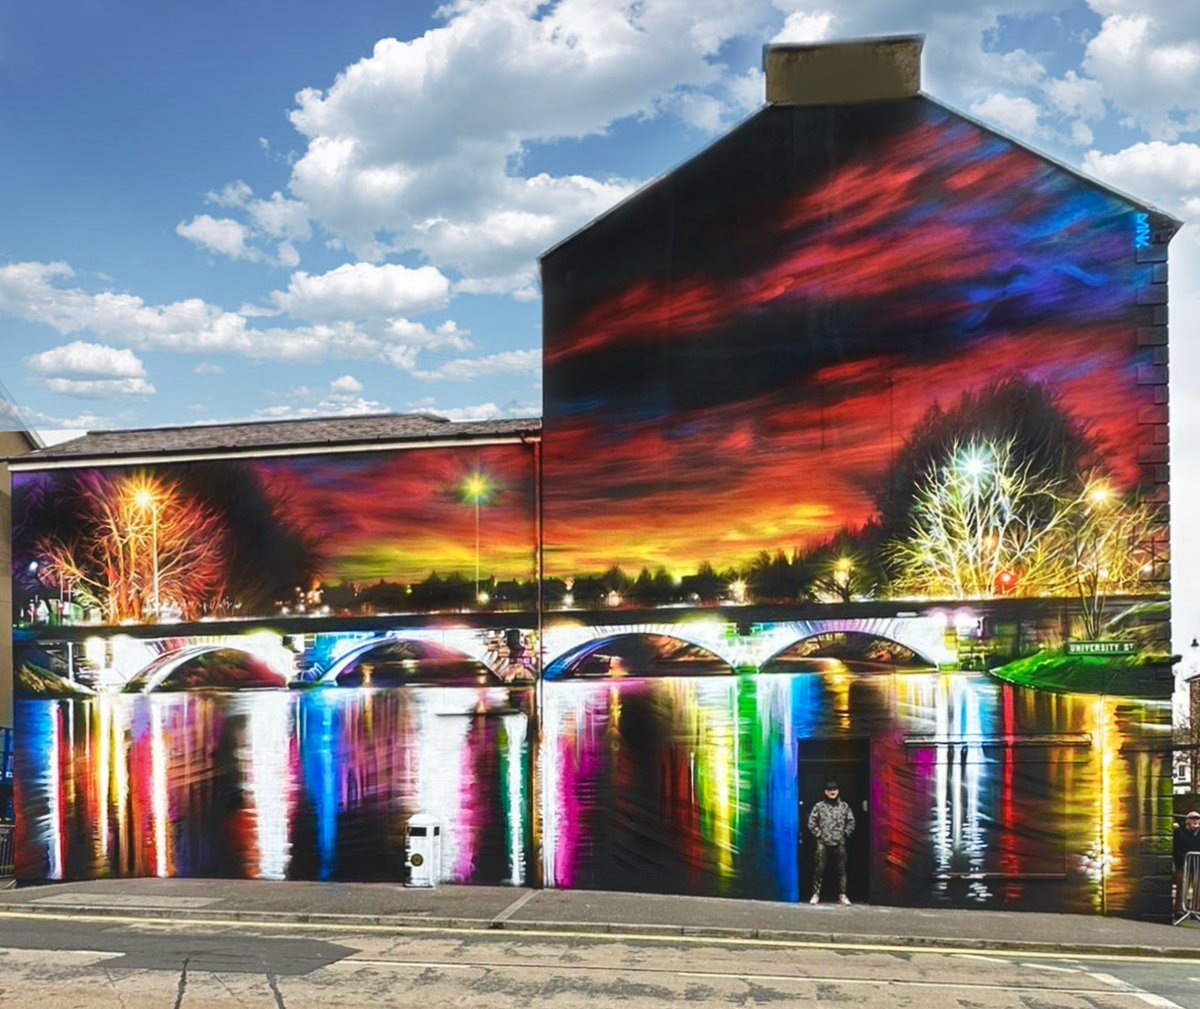 Ormeau Bridge’ - Belfast - super happy to finally reveal my latest mural here in amazing Belfast! It’s a huge wall approximately 50ft x 80ft and I painted it as always freehand, all by eye with @loopcolors - I’ve had such an amazing response from the local community !